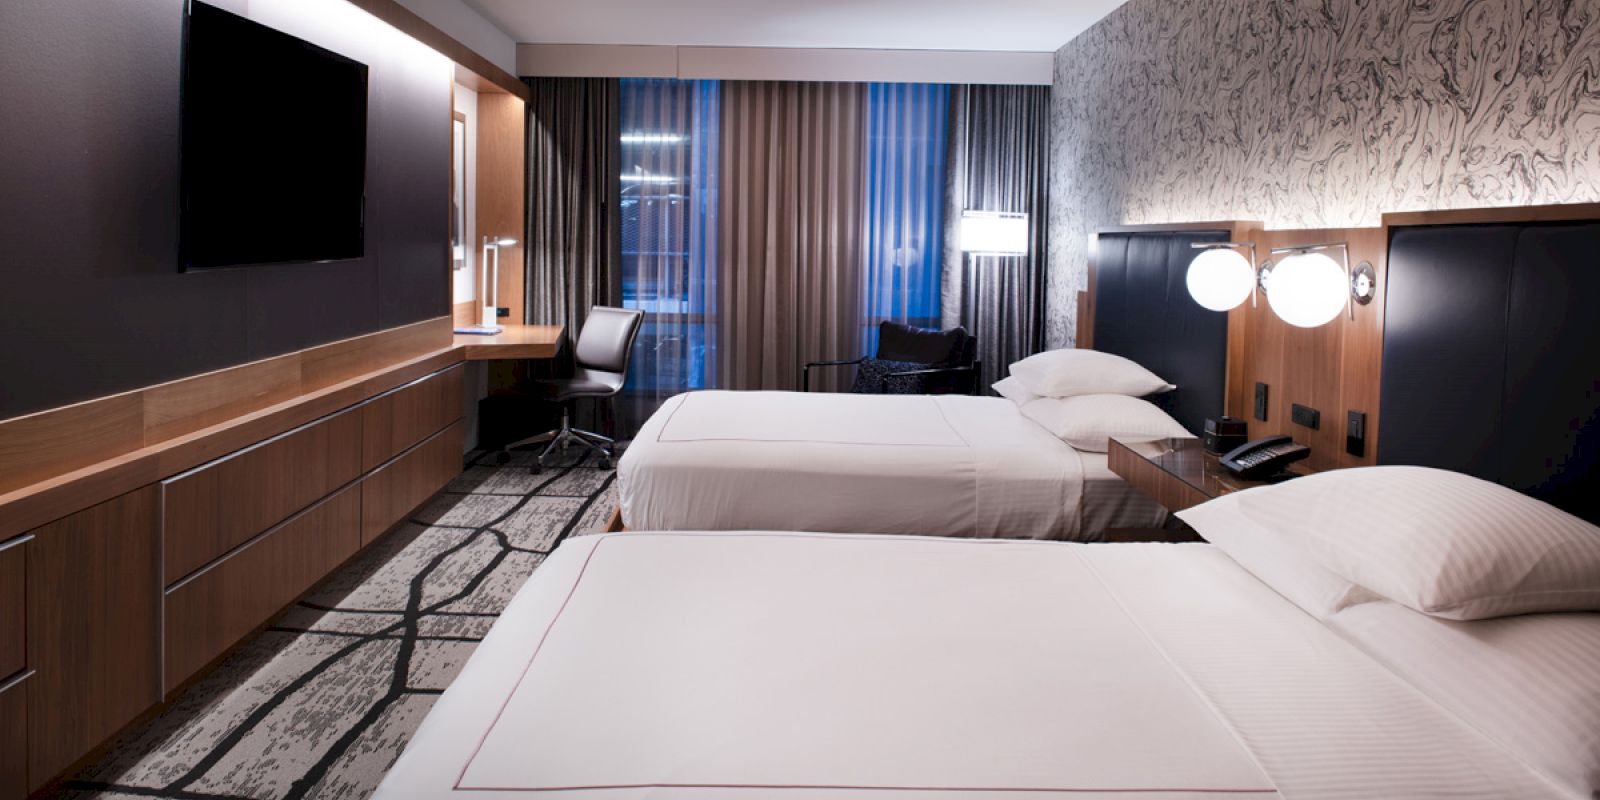 A modern hotel room features two neatly made beds, a large flat-screen TV, a desk with a chair, and a patterned carpet, all lit by stylish lamps.